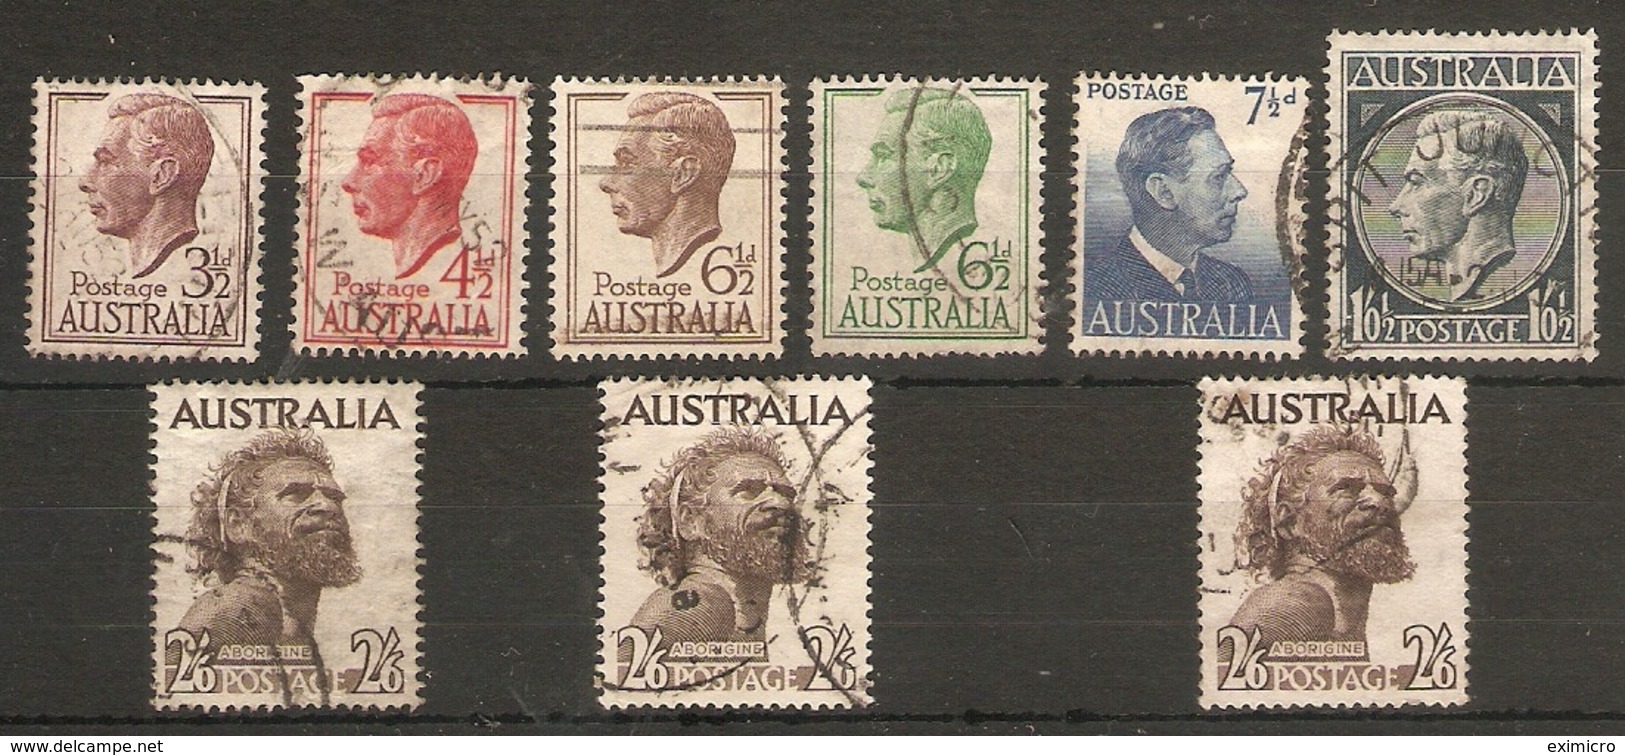 AUSTRALIA 1951 - 1965 SET OF 9 STAMPS SG 247/253bba FINE USED Cat £21+ - Used Stamps